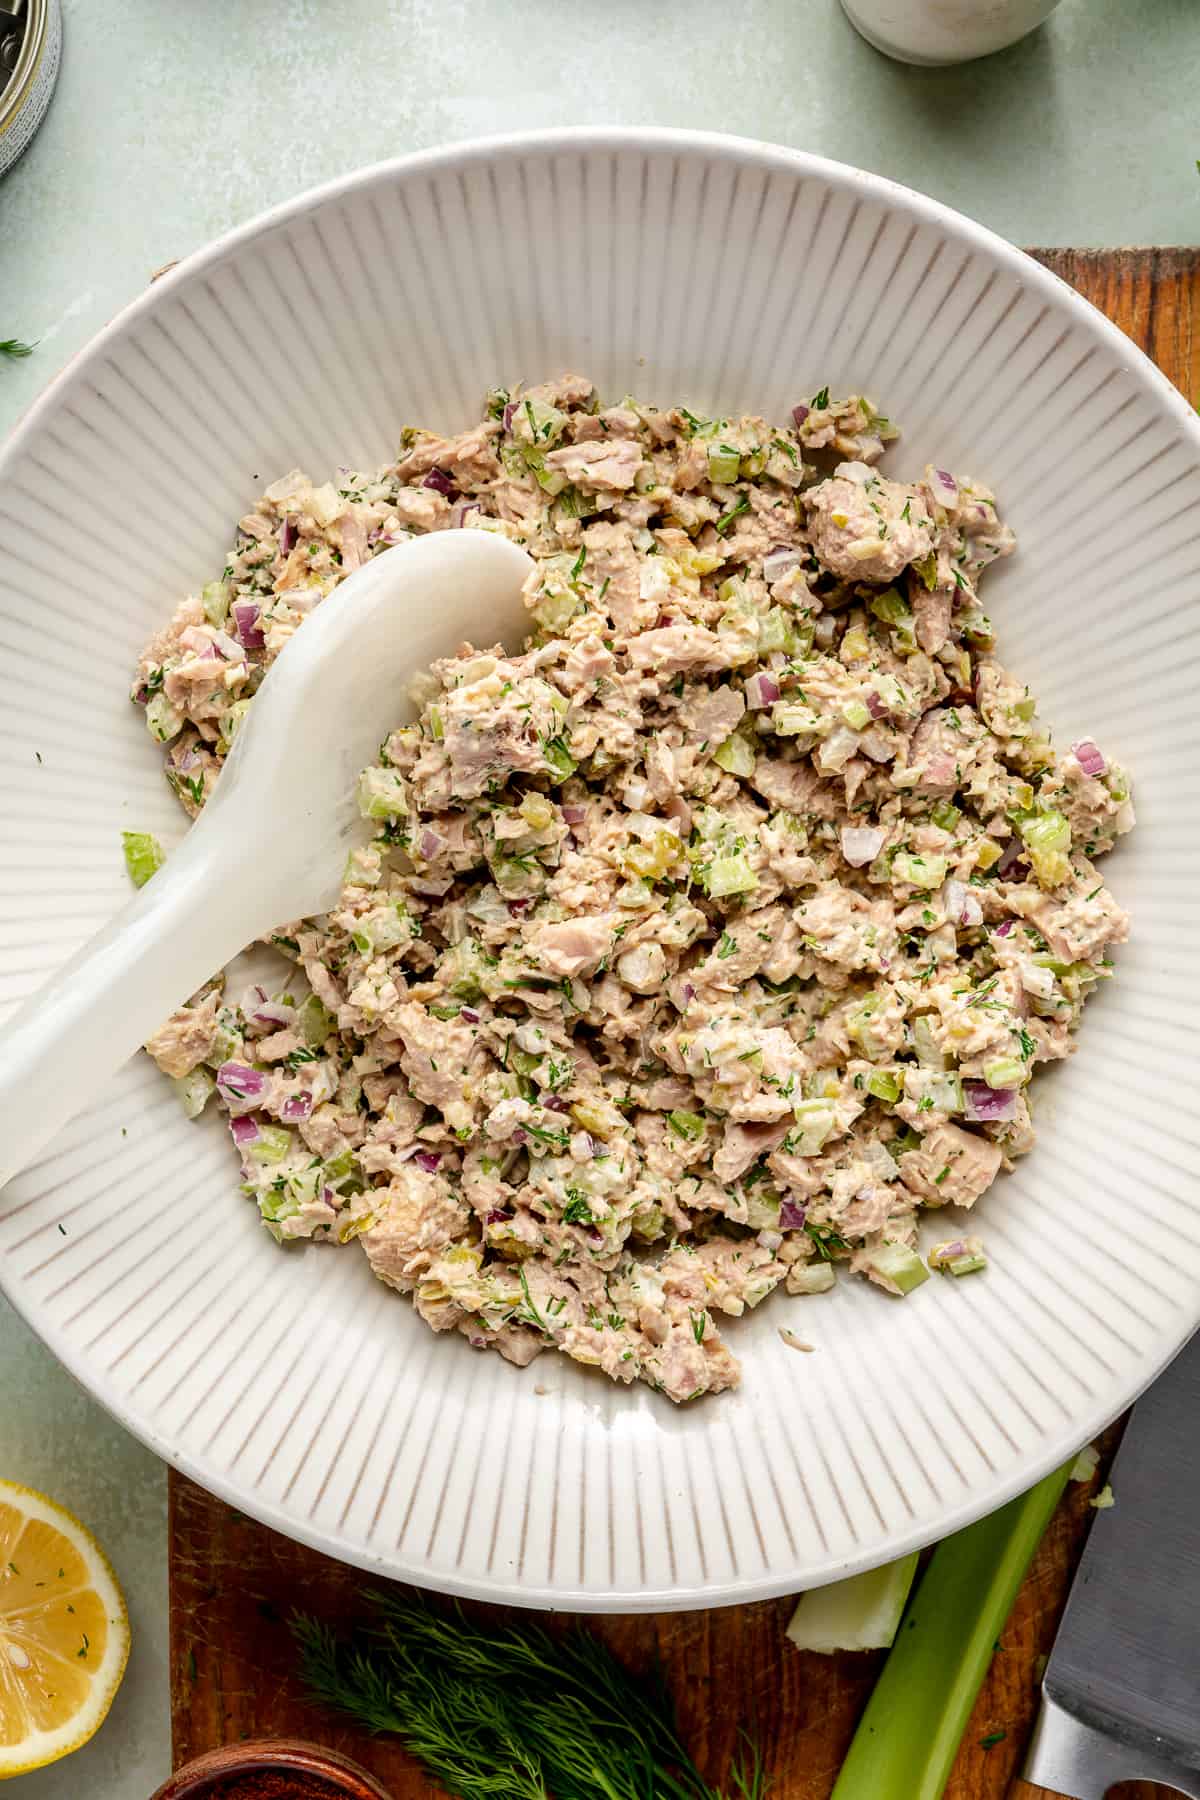 Classic Tuna Salad combined in large bowl.